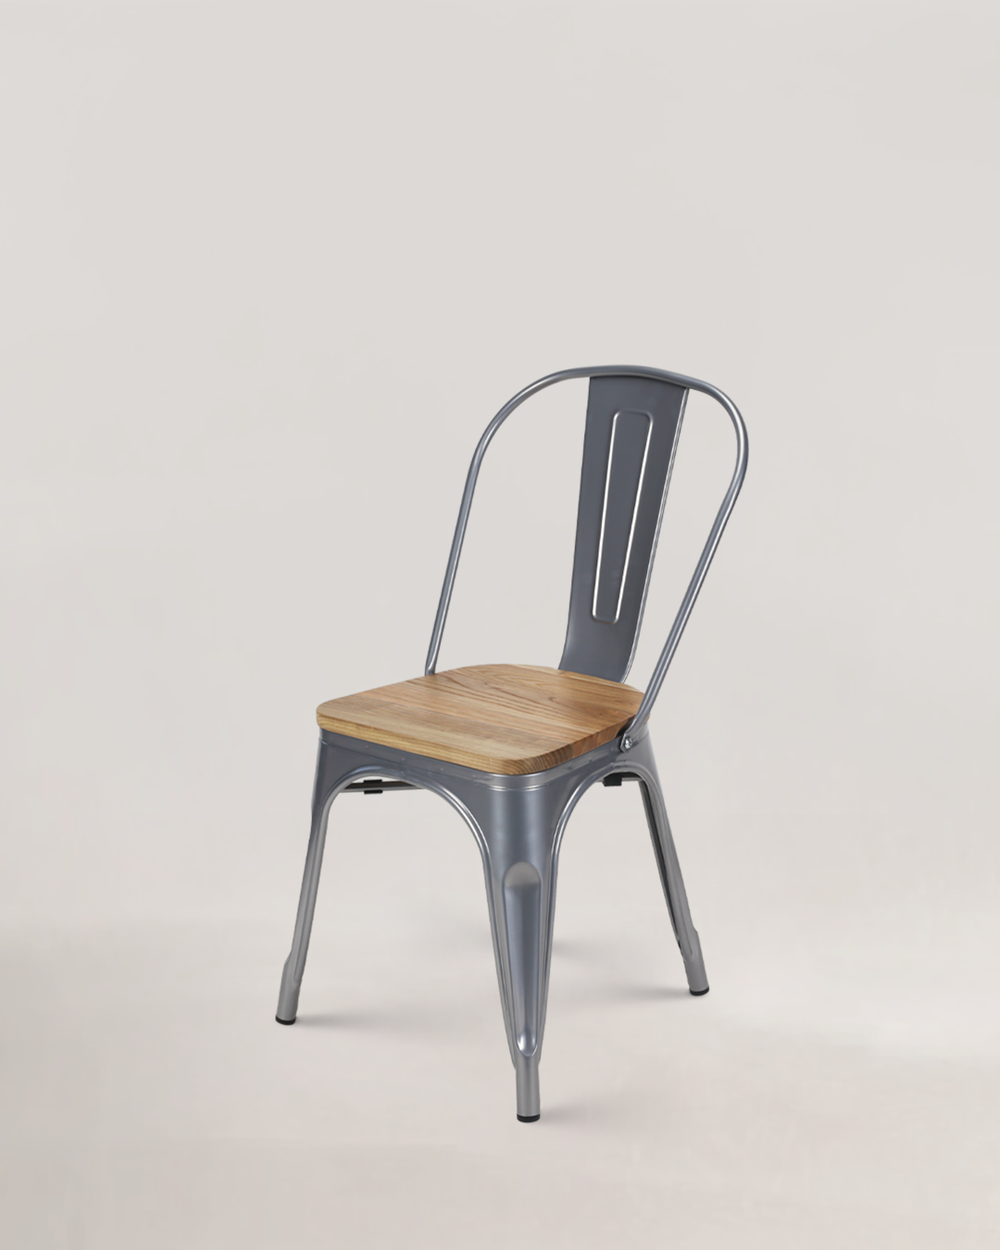 Tolix Armless Chair (Wooden Seat)